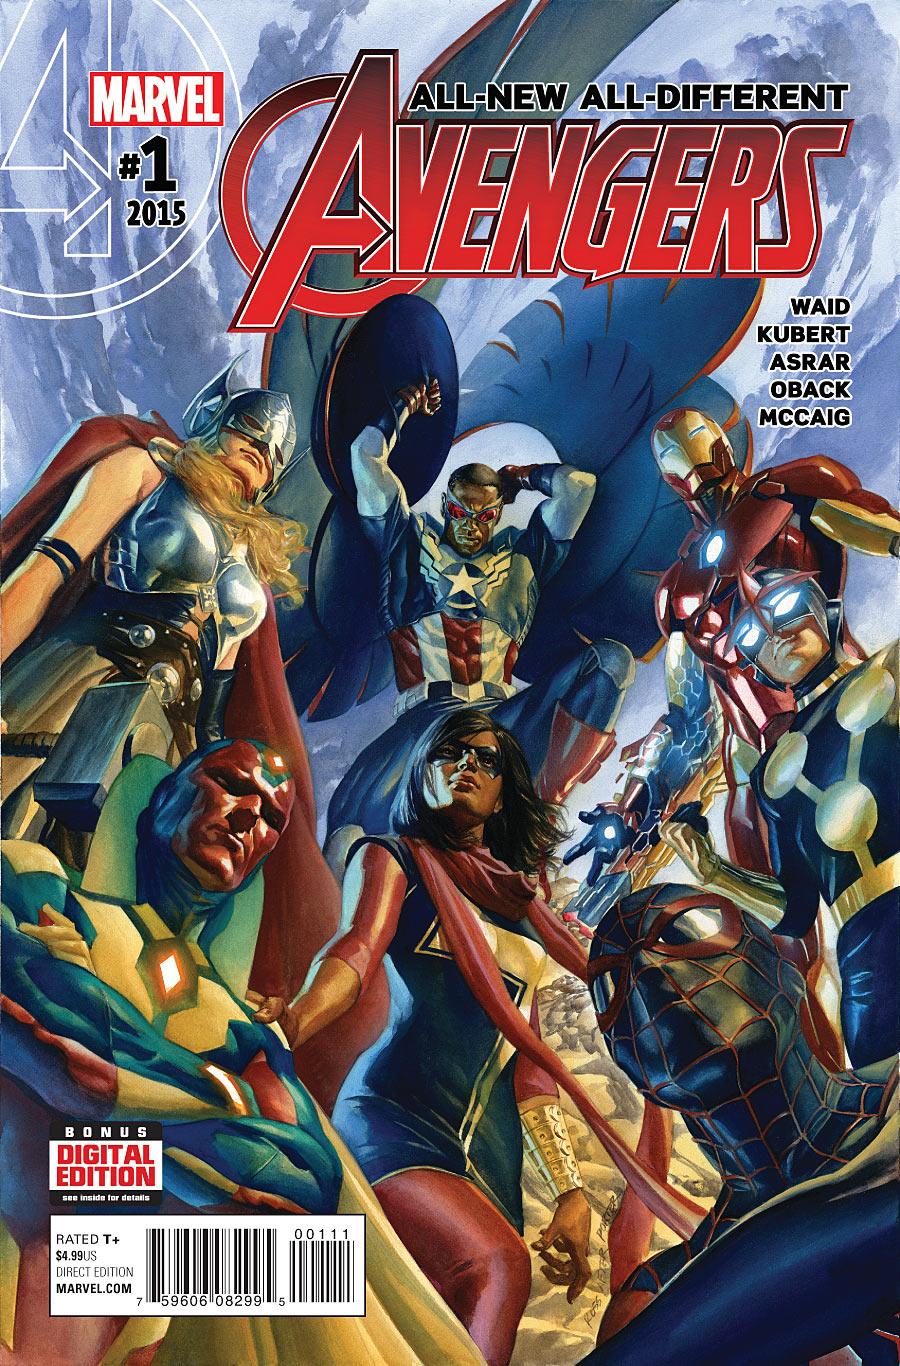 All-New, All-Different Avengers Vol. 1 #1